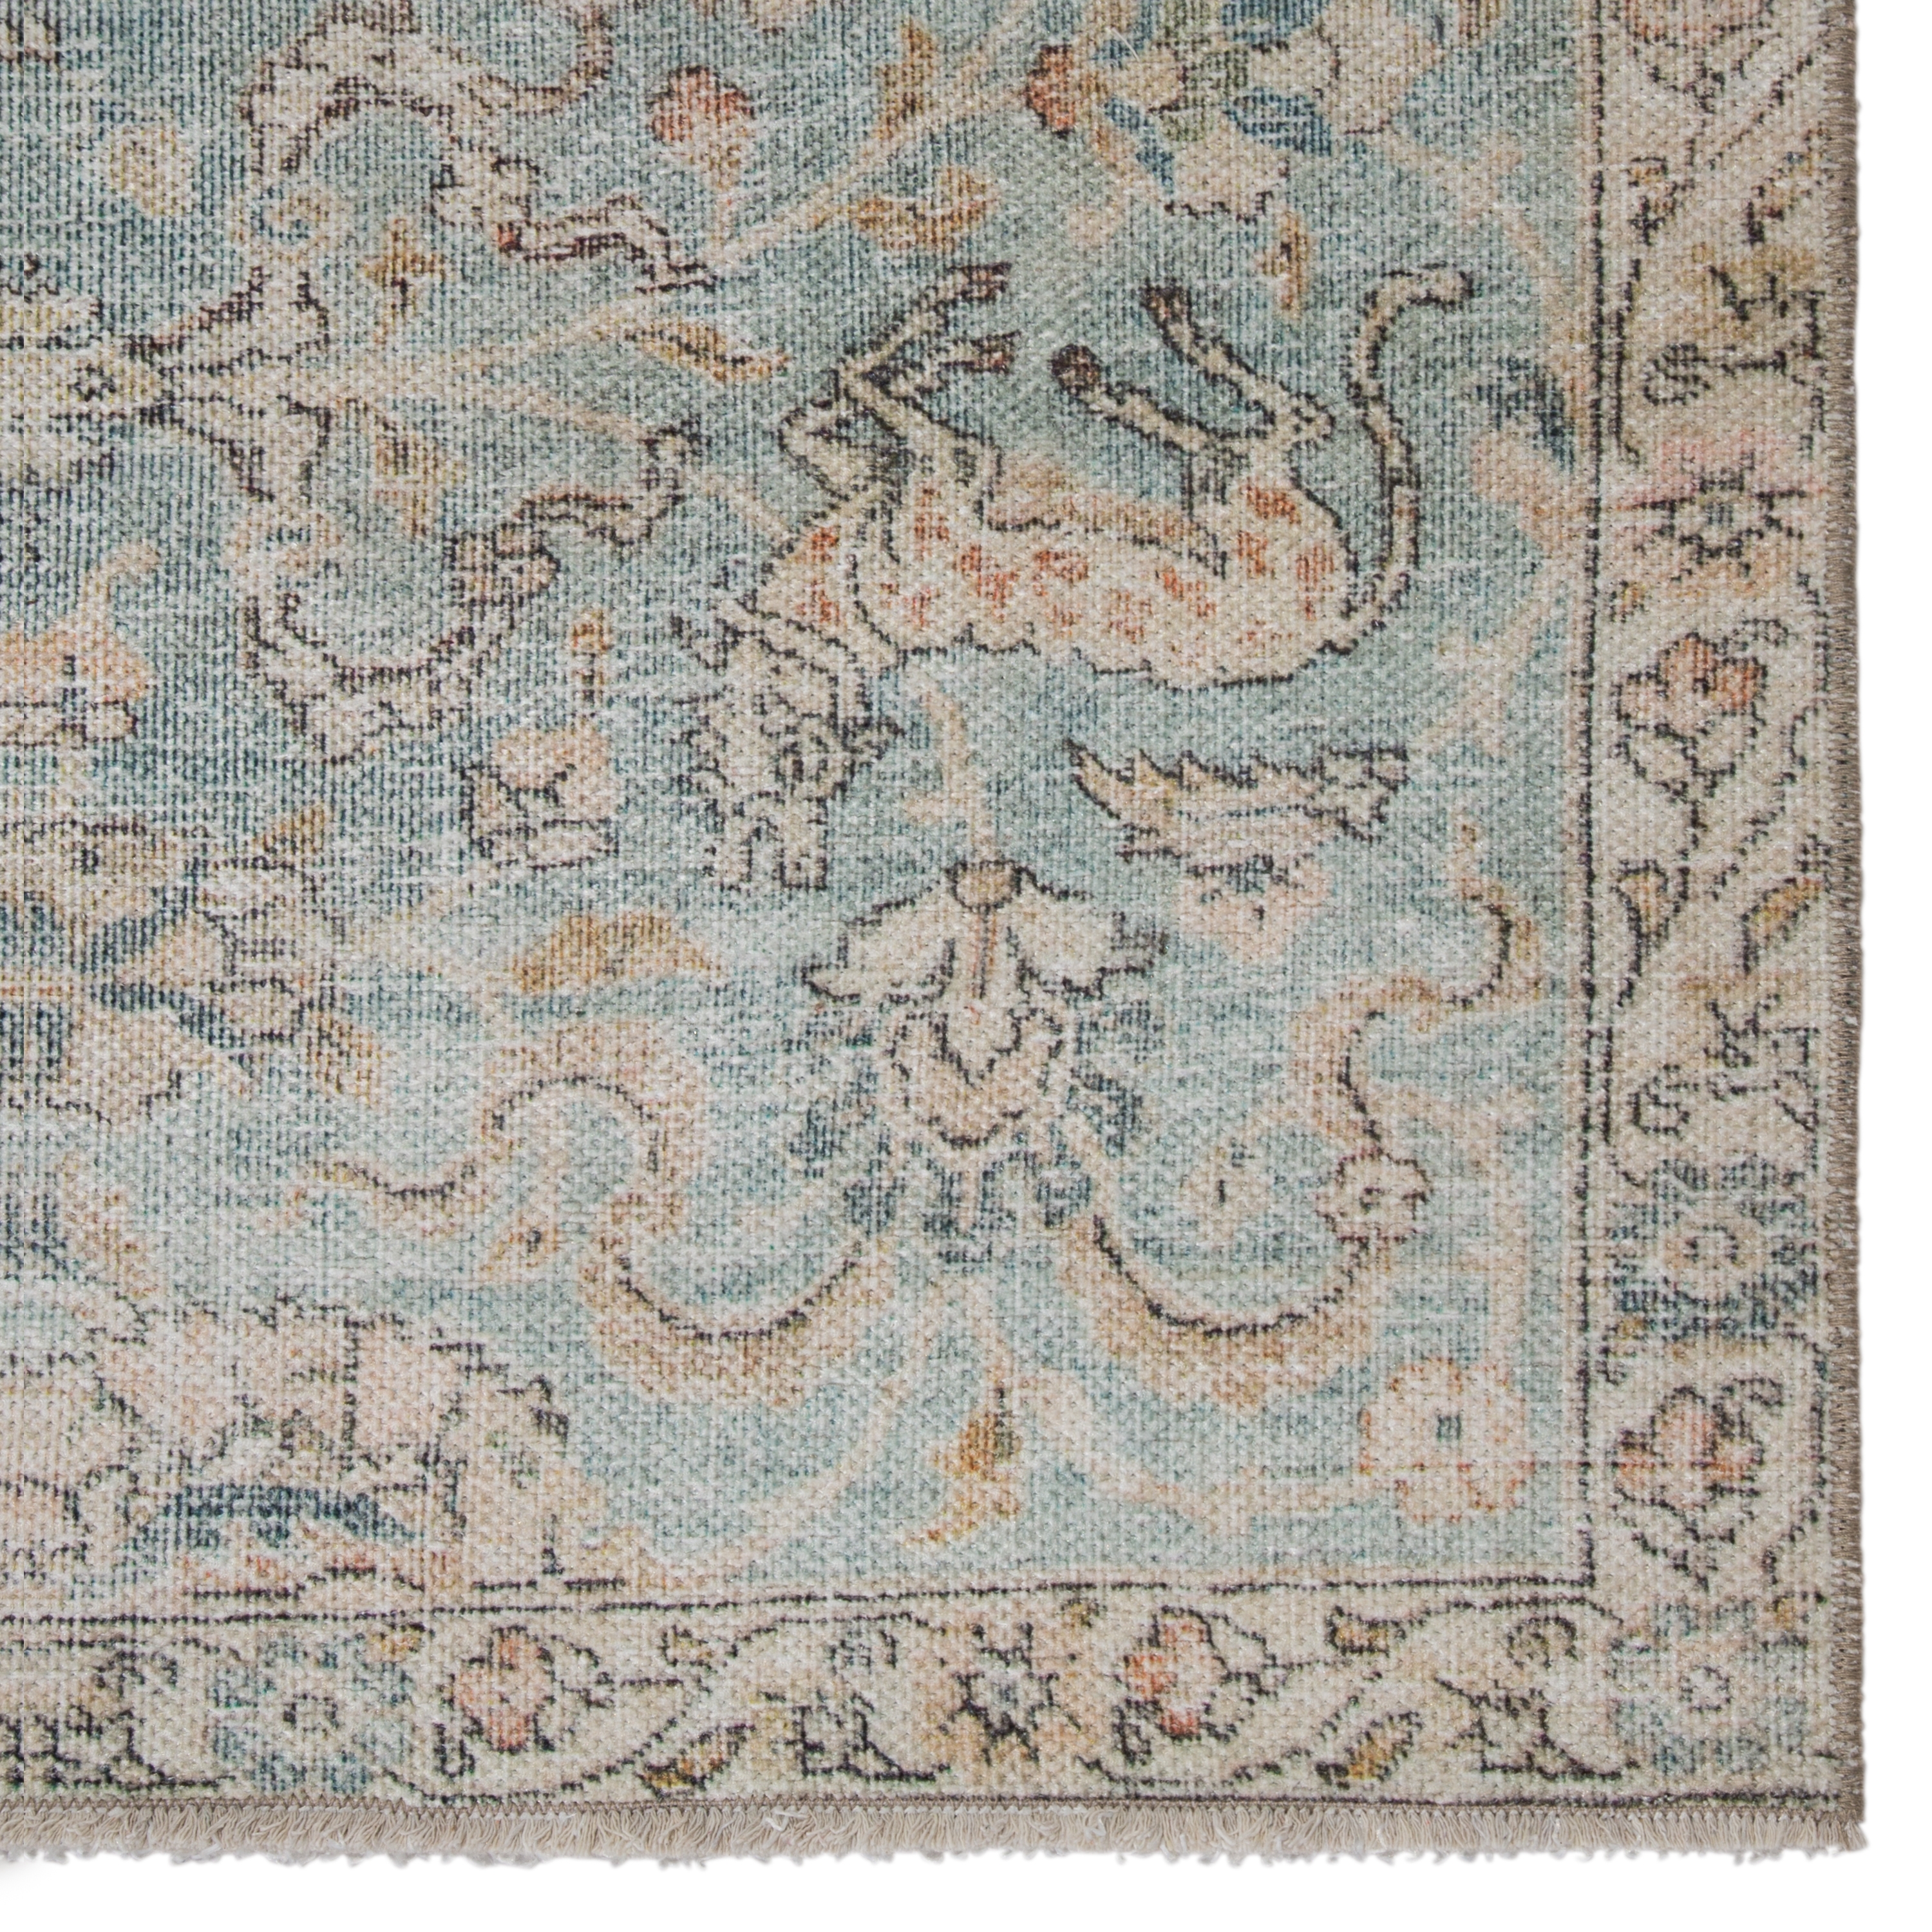 Stag Oriental Teal/ Gold Area Rug (7'10"X9'10") - Image 3